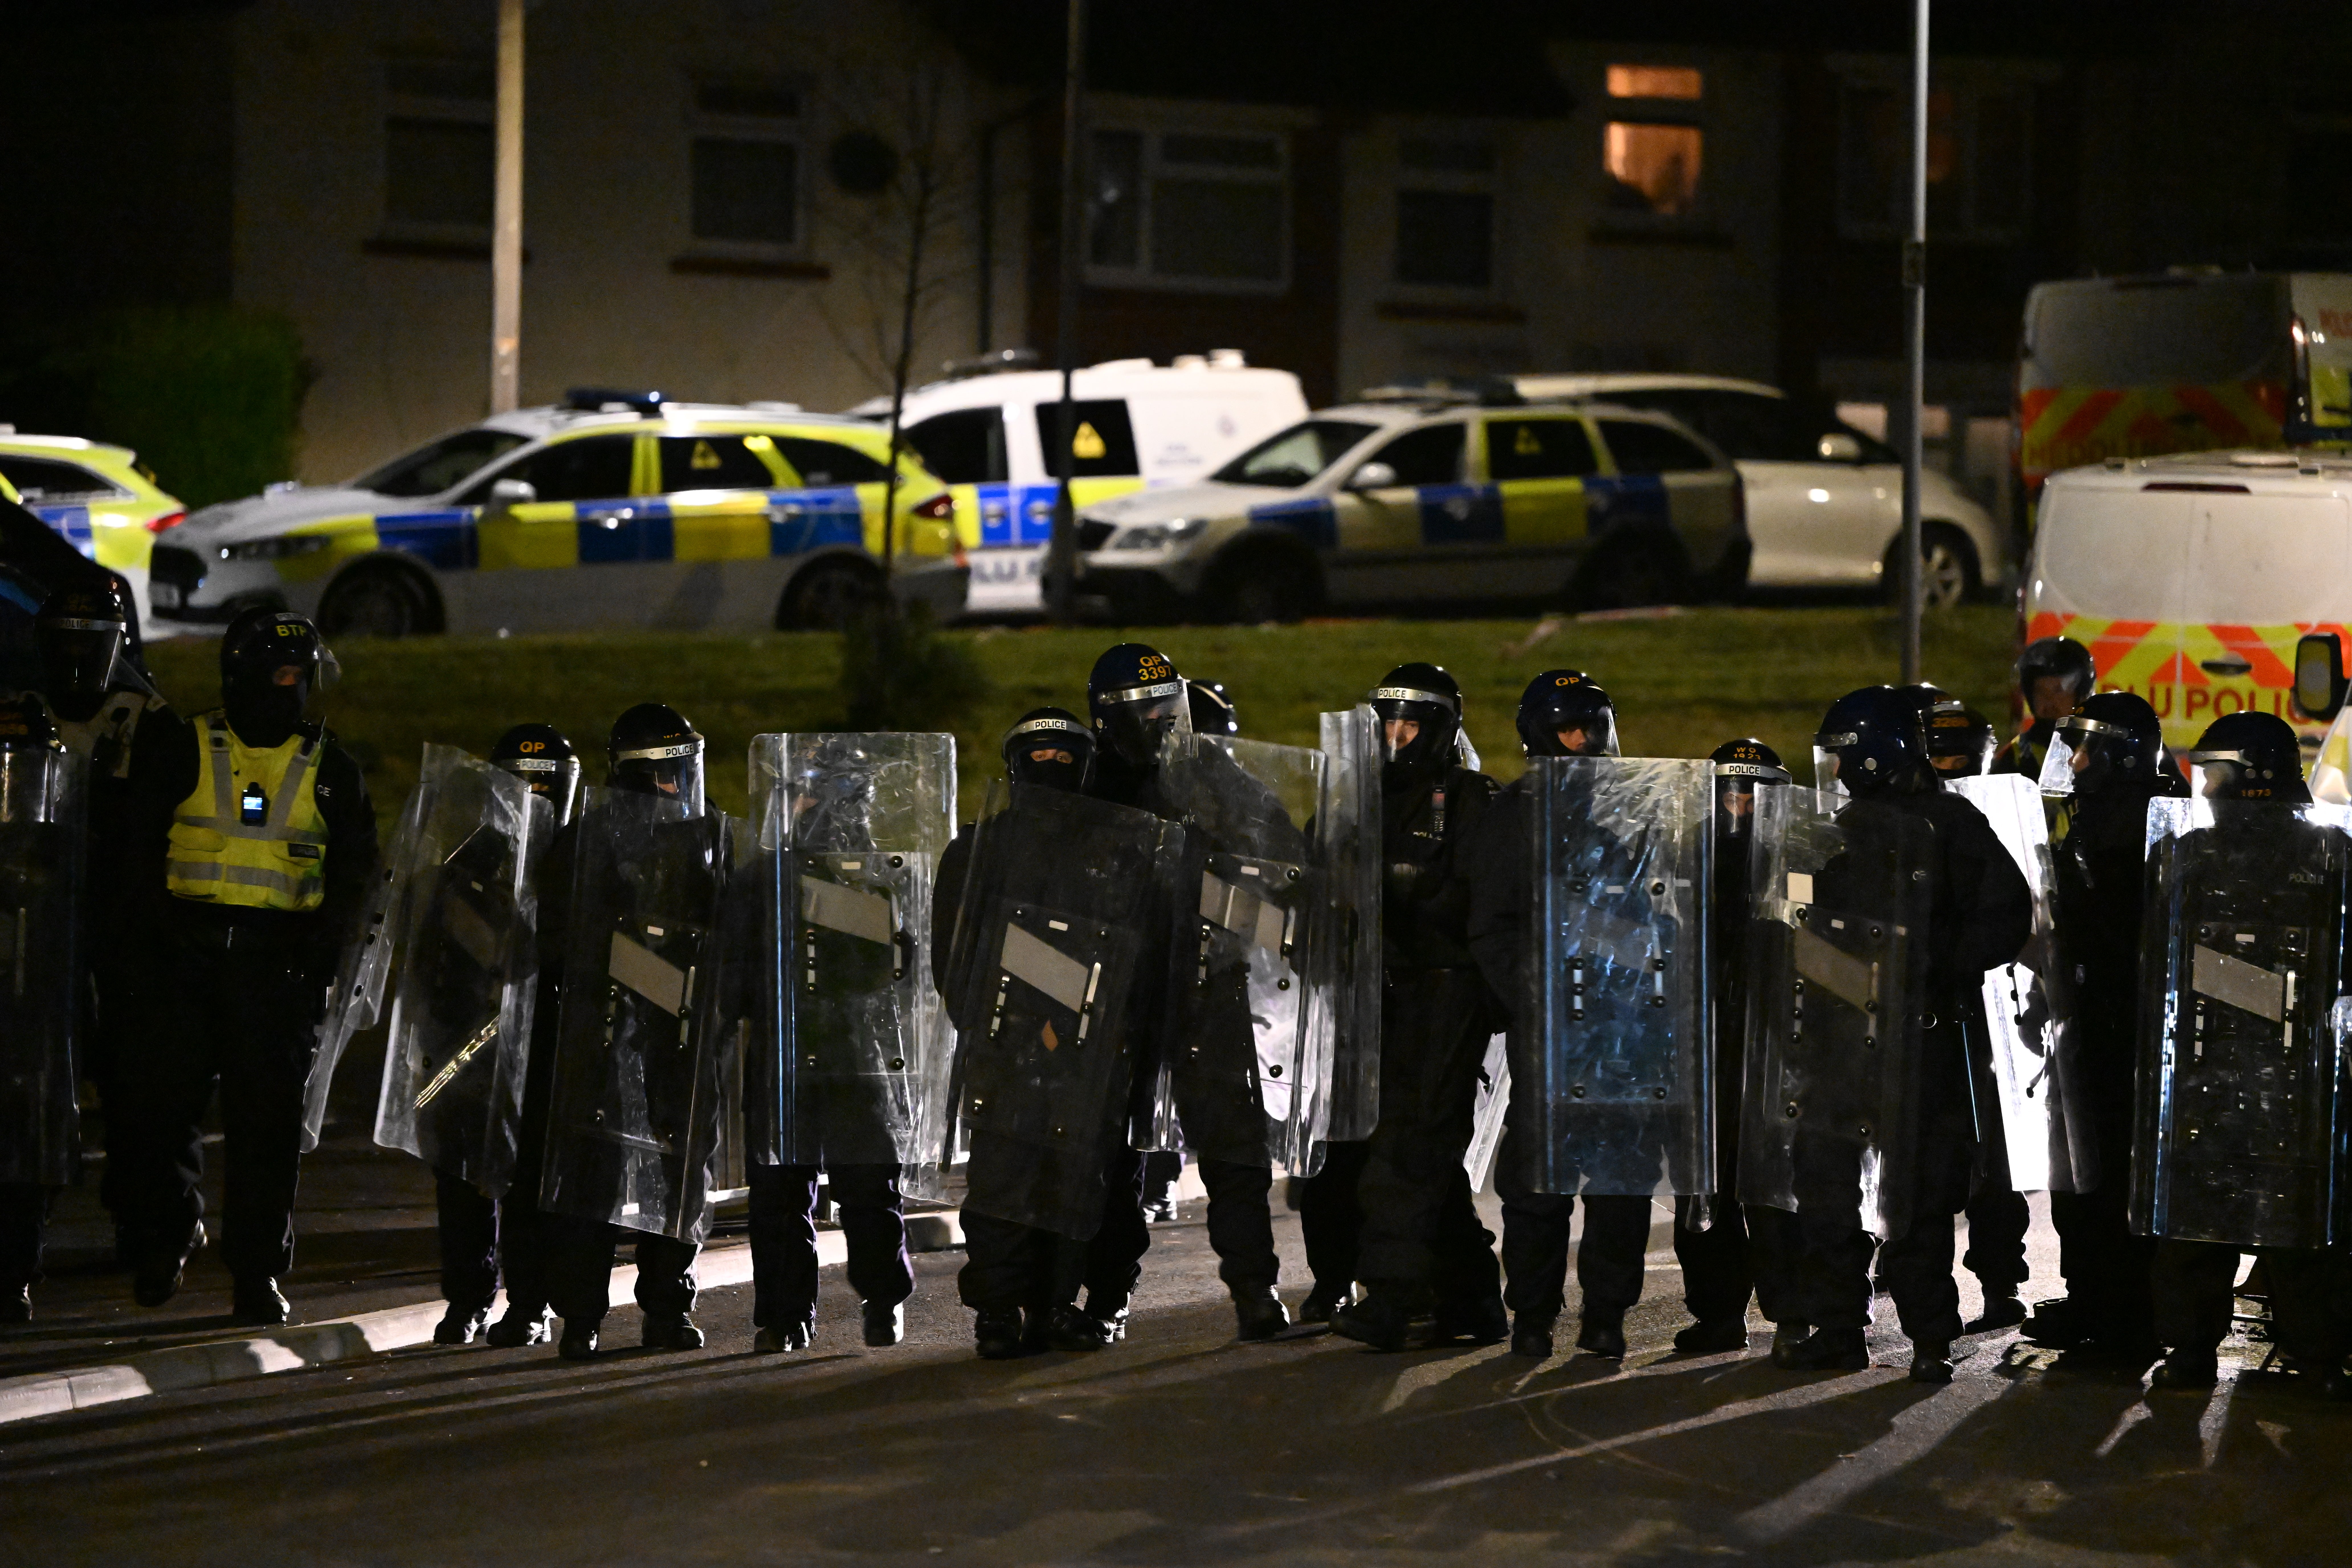 Specially trained public order officers were deployed on Snowden Road, including officers from neighbouring police forces